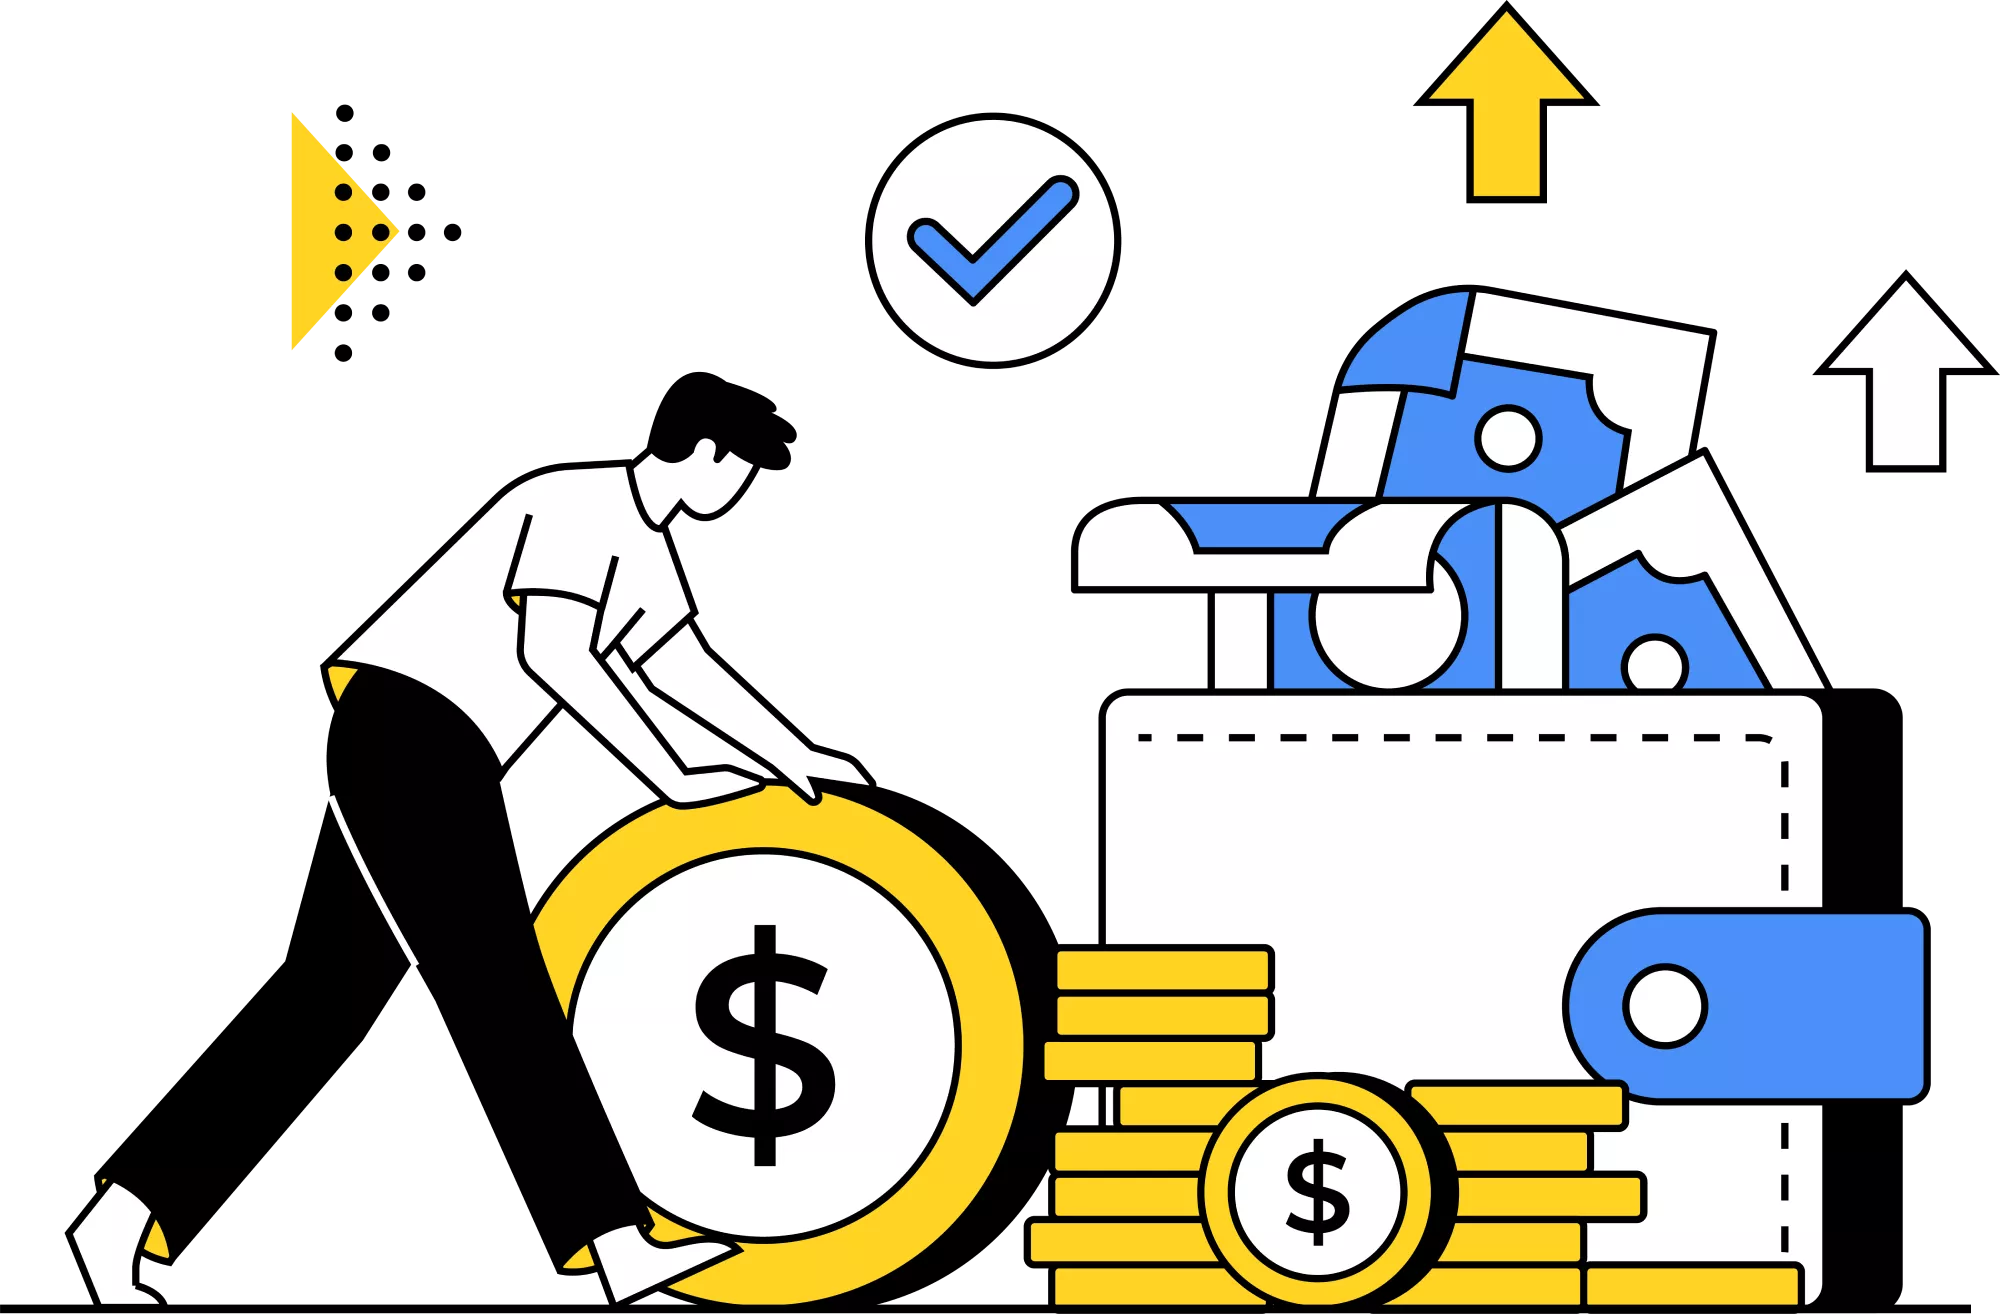 illustration of a business owner's wallet overflowing with cash and coins in need of a business account